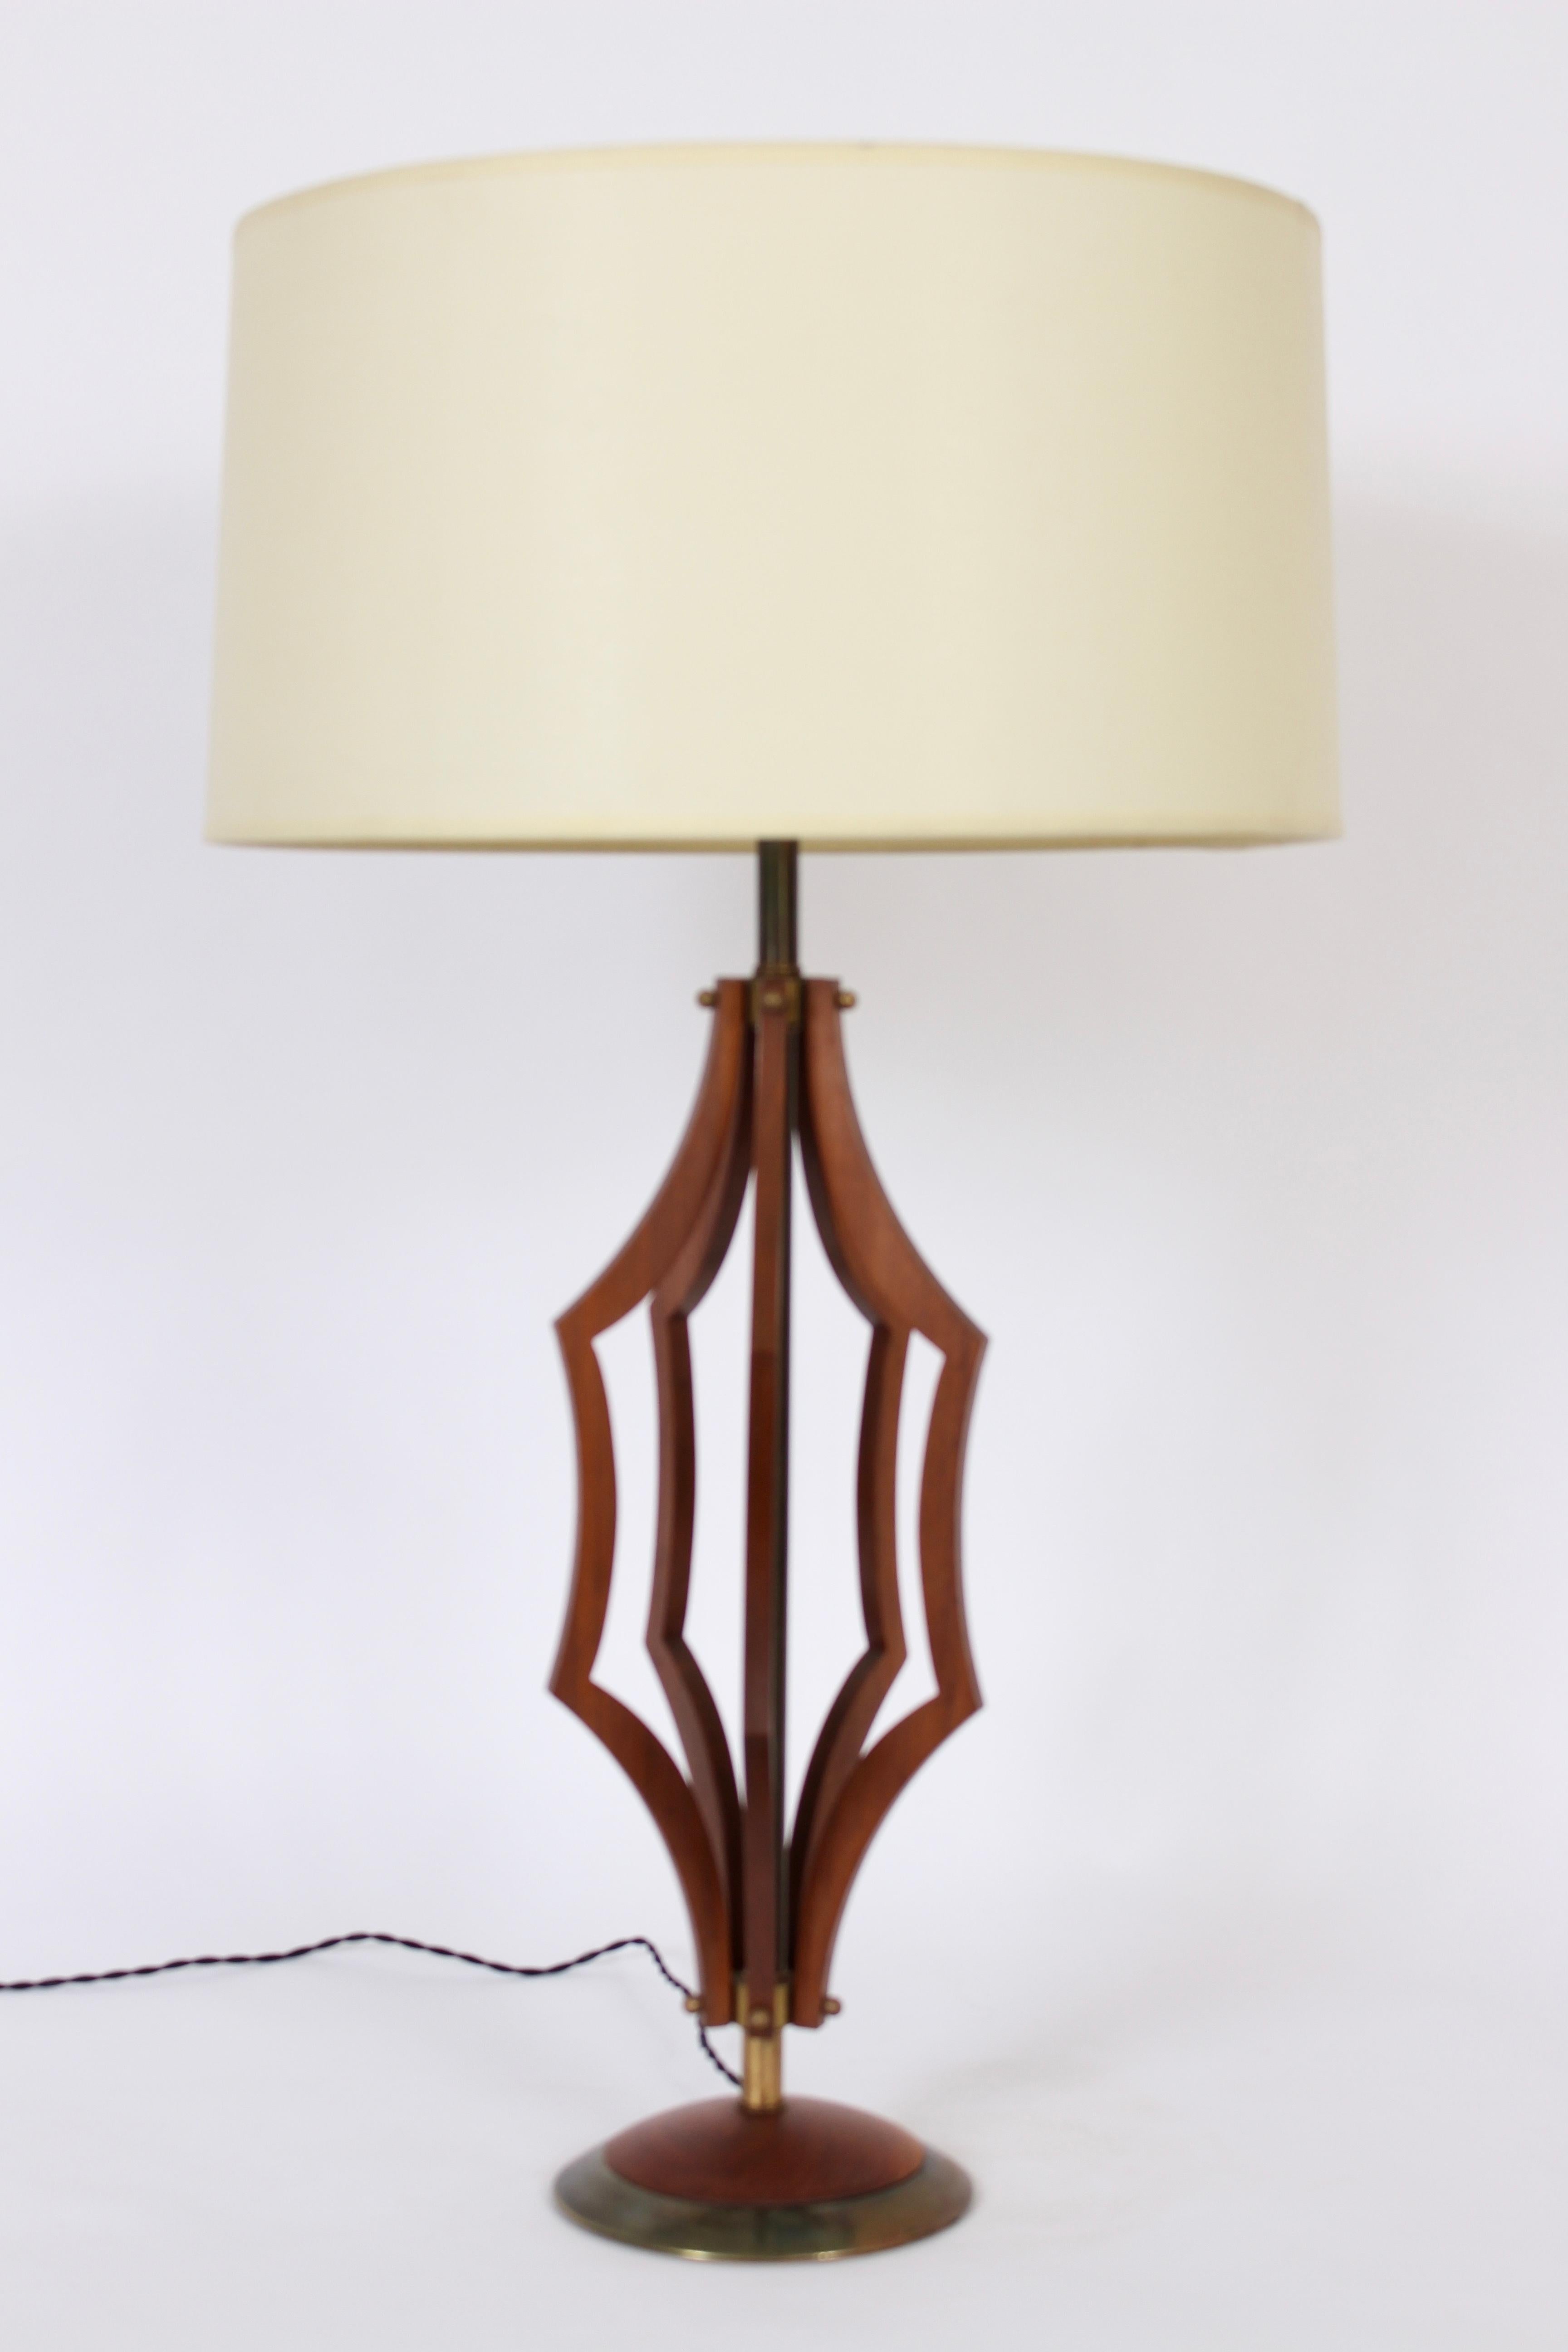 Tall Modernist walnut table lamp with Hexagonal flared framework and brass detail. Featuring an open and joined six piece Walnut framework. With Walnut base and patinated Brass inset. 34H to top of finial with harp in place. 27H to top of socket.